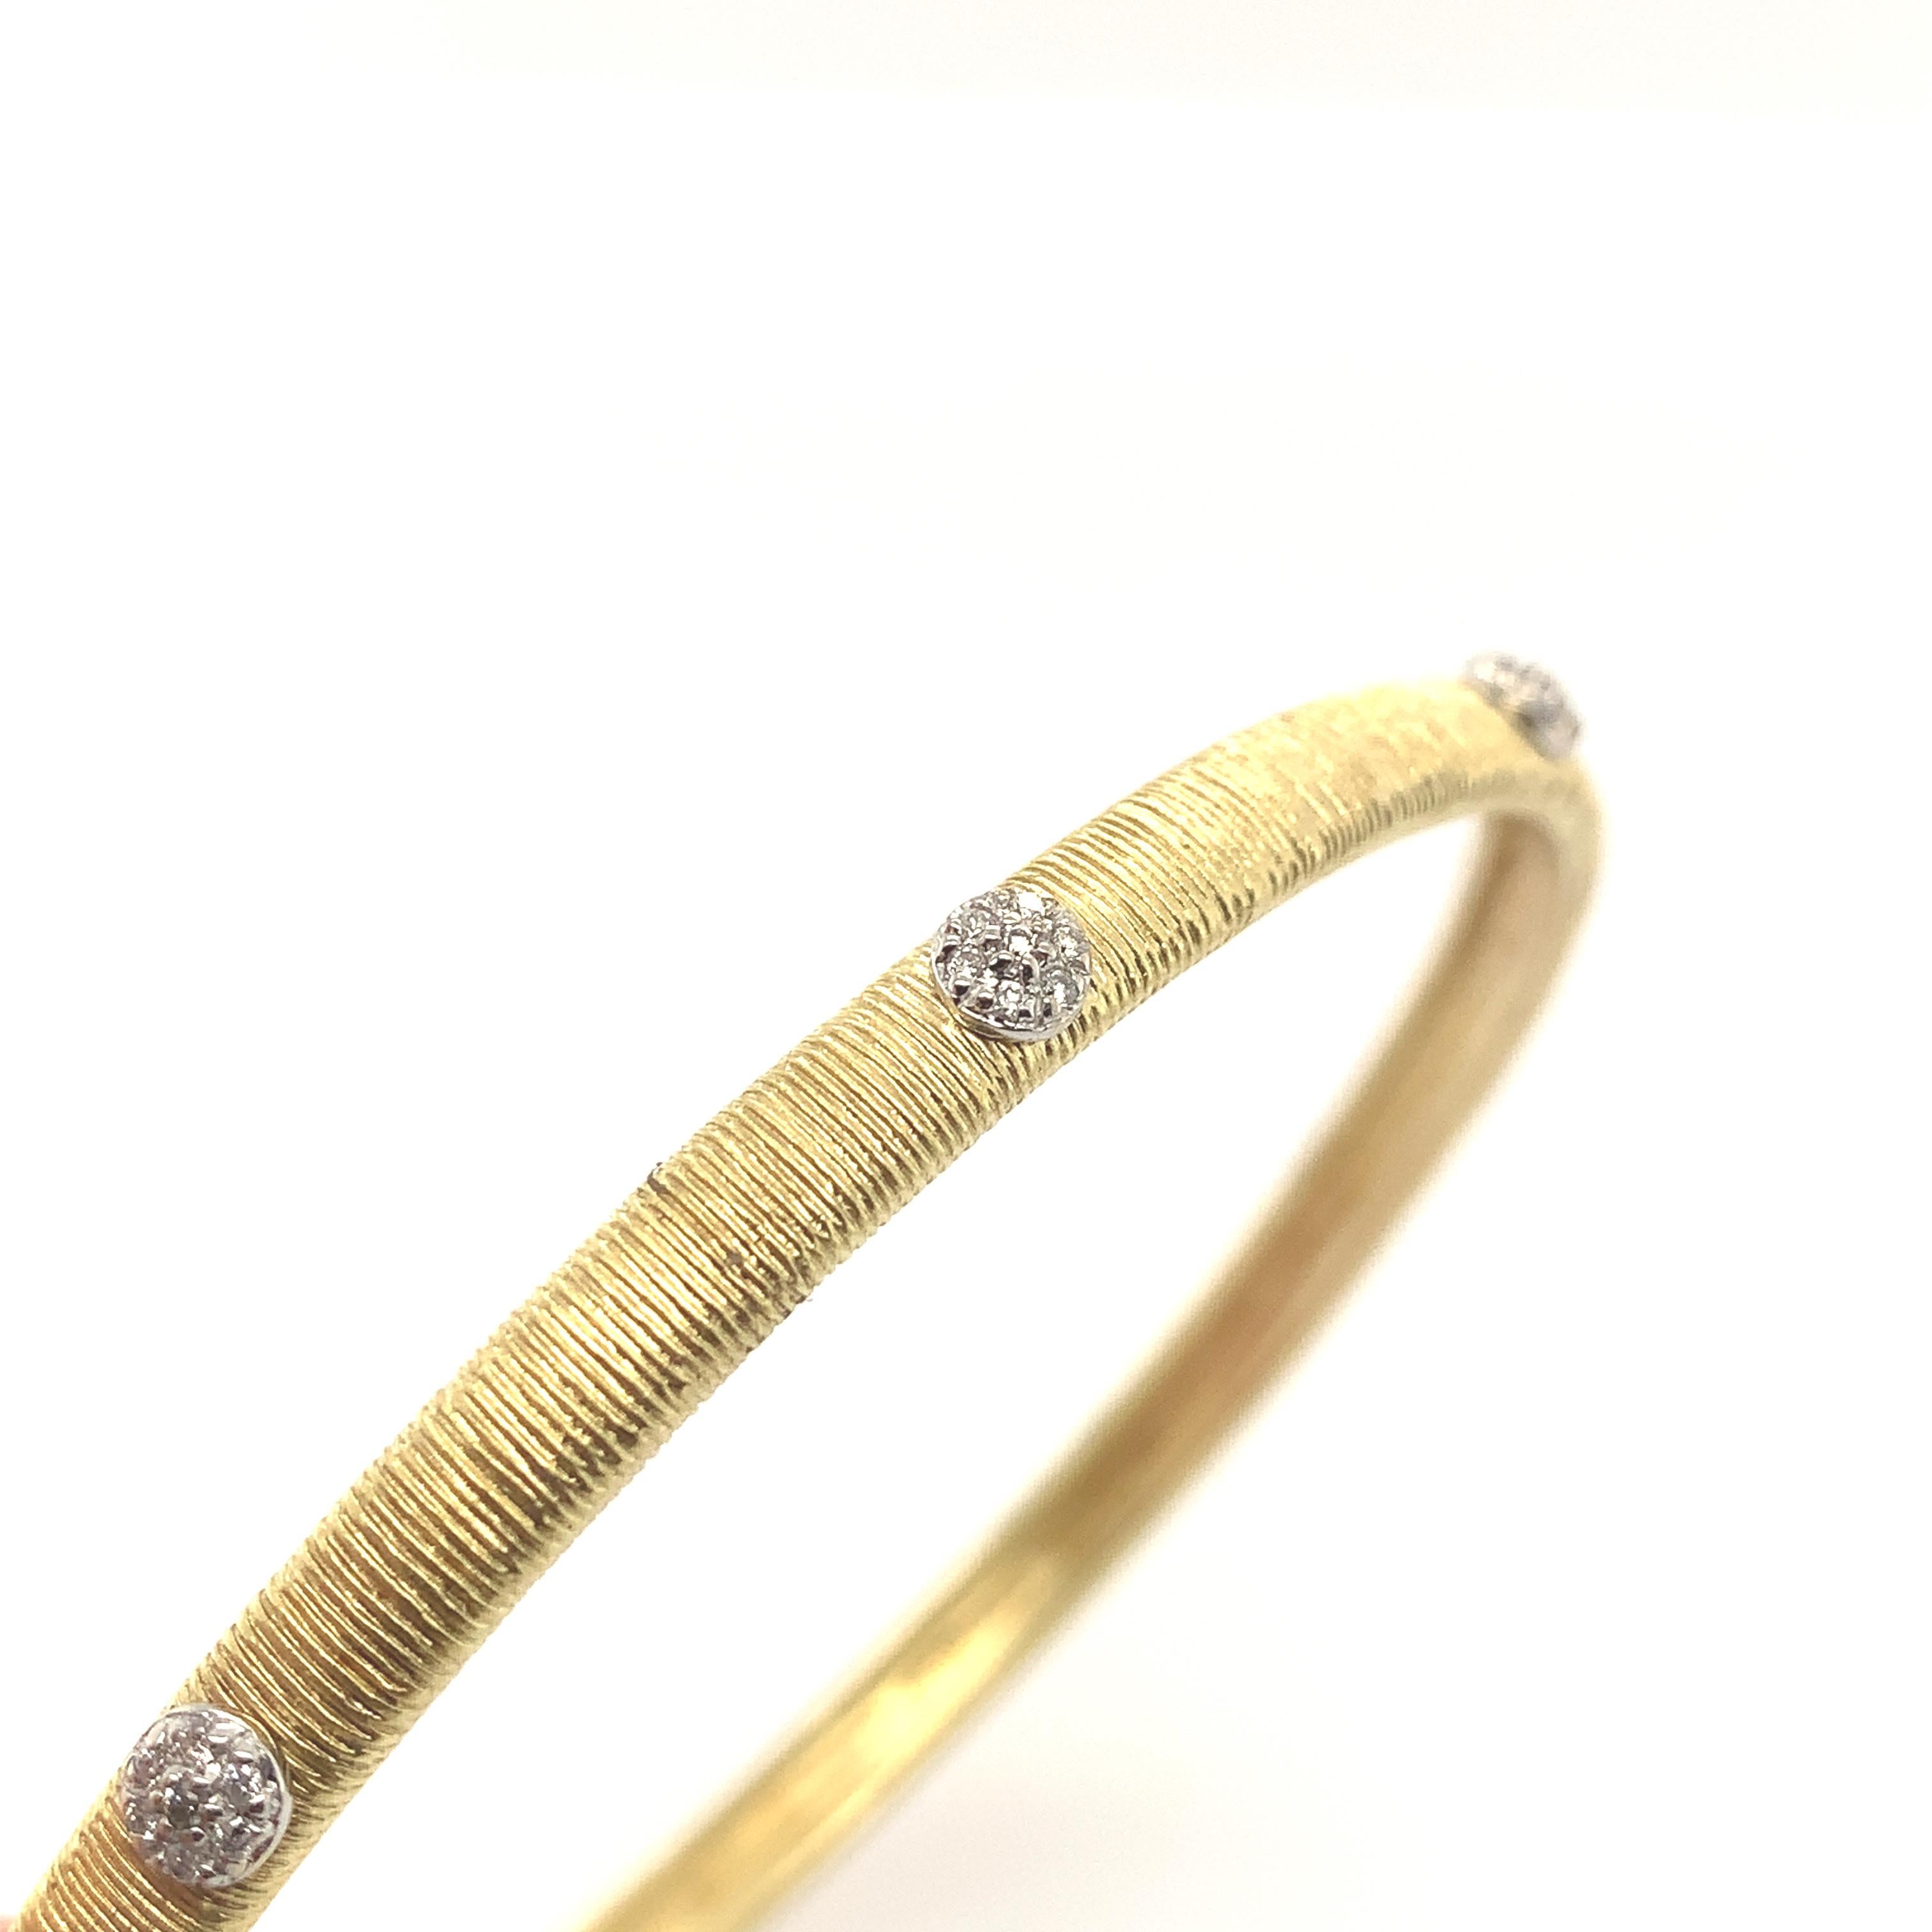 A unique bangle bracelet crafted by Meira T using the Florentine technique of feather thin sophisticated hand engraving. This bracelet is embellished with 0.32 carats of diamonds featuring (8) eight diamond floral motif elements giving the bangle a